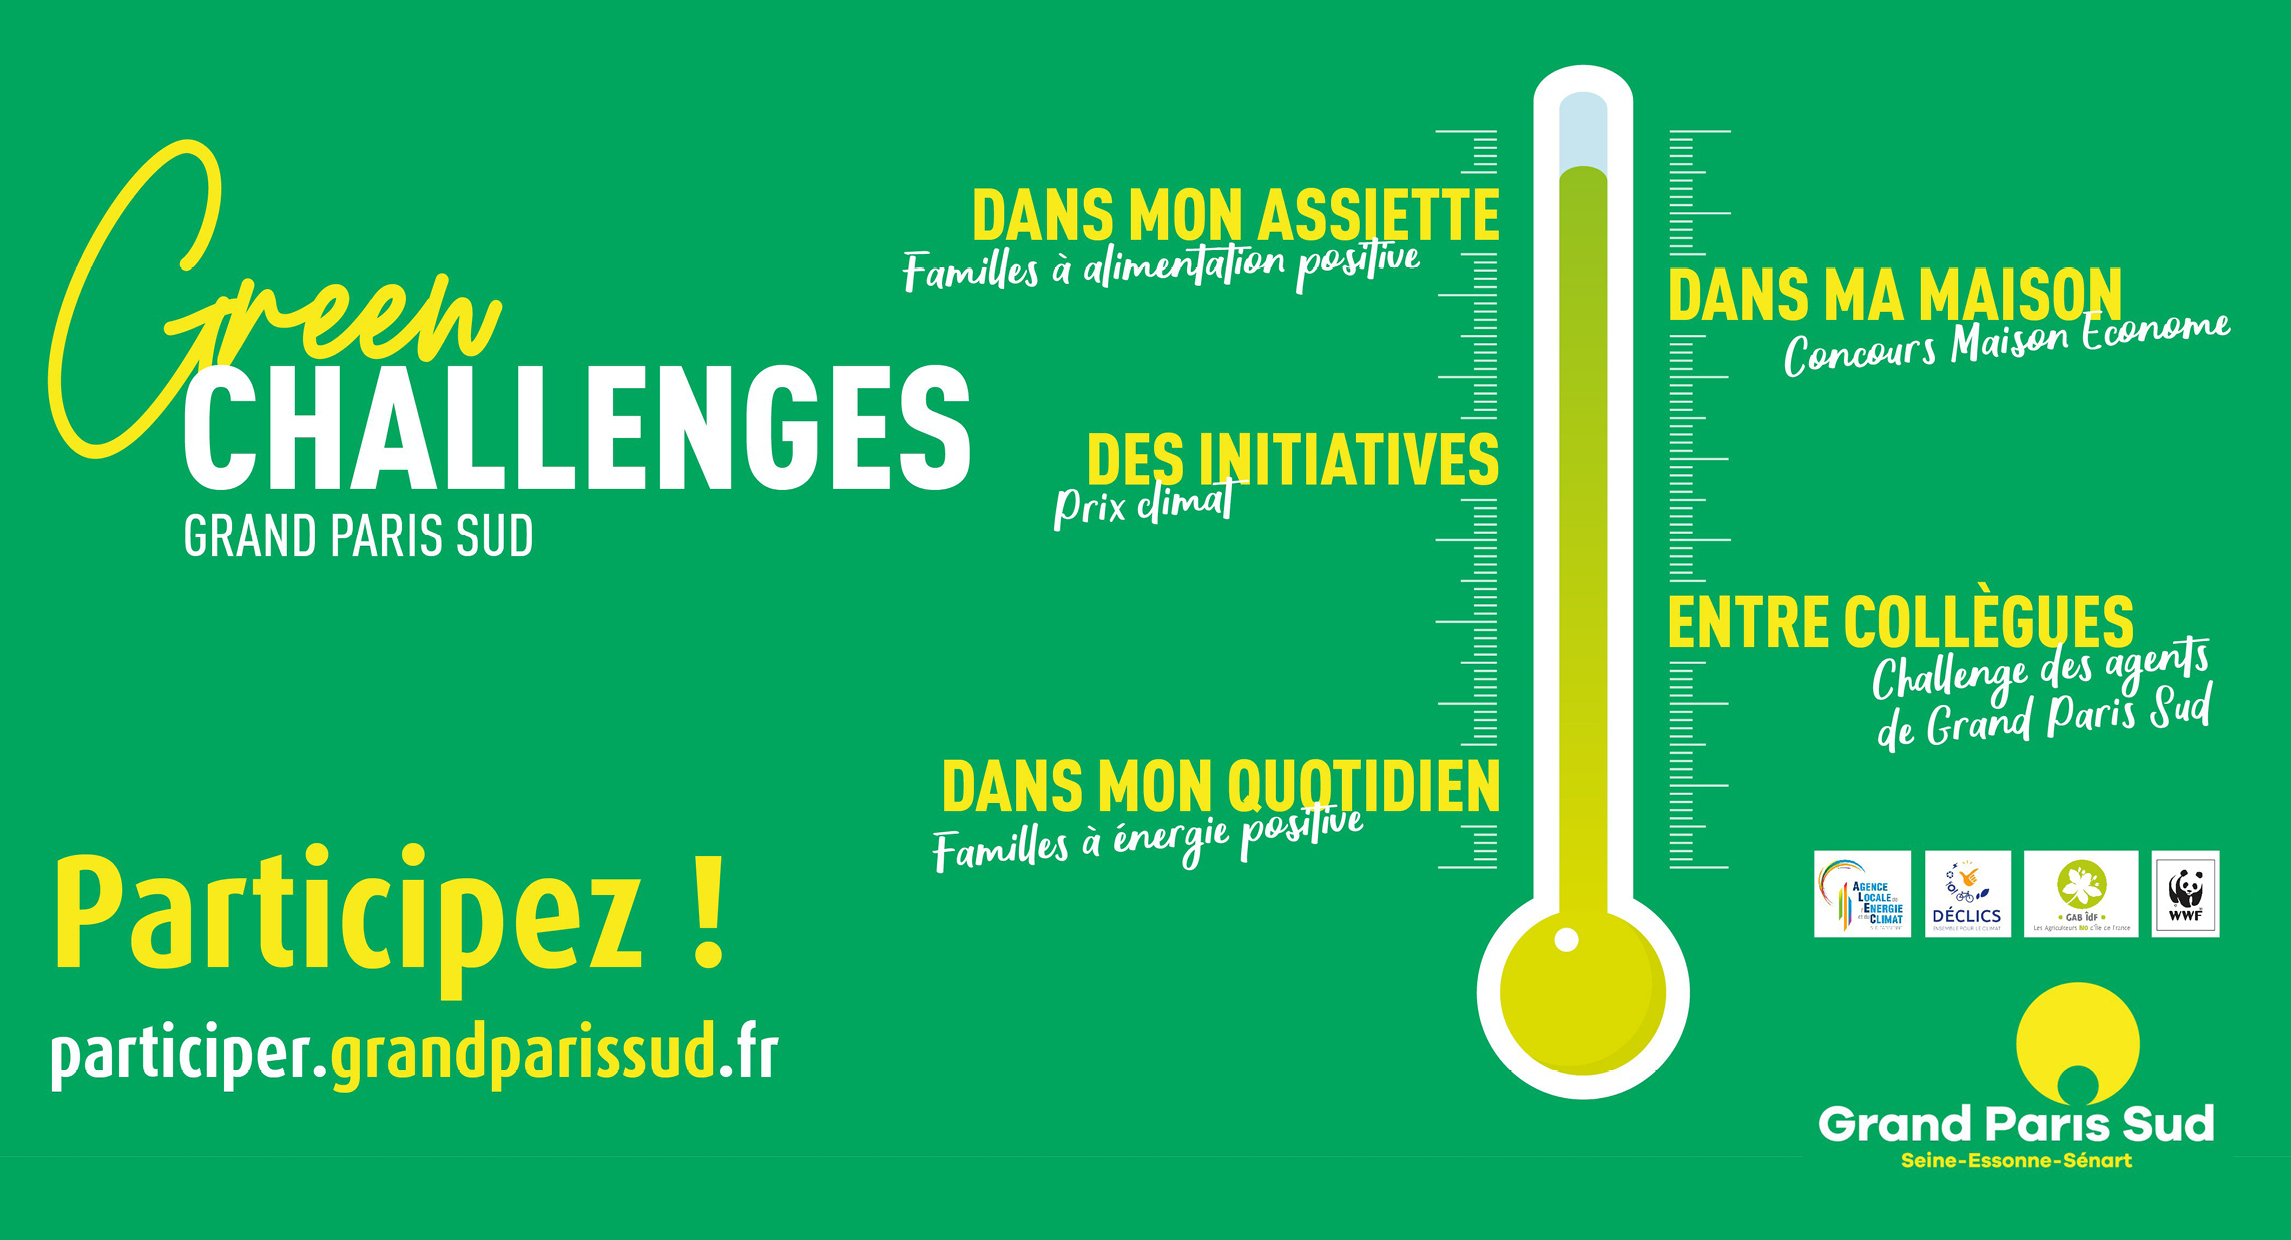 LE GREEN CHALLENGES 2020